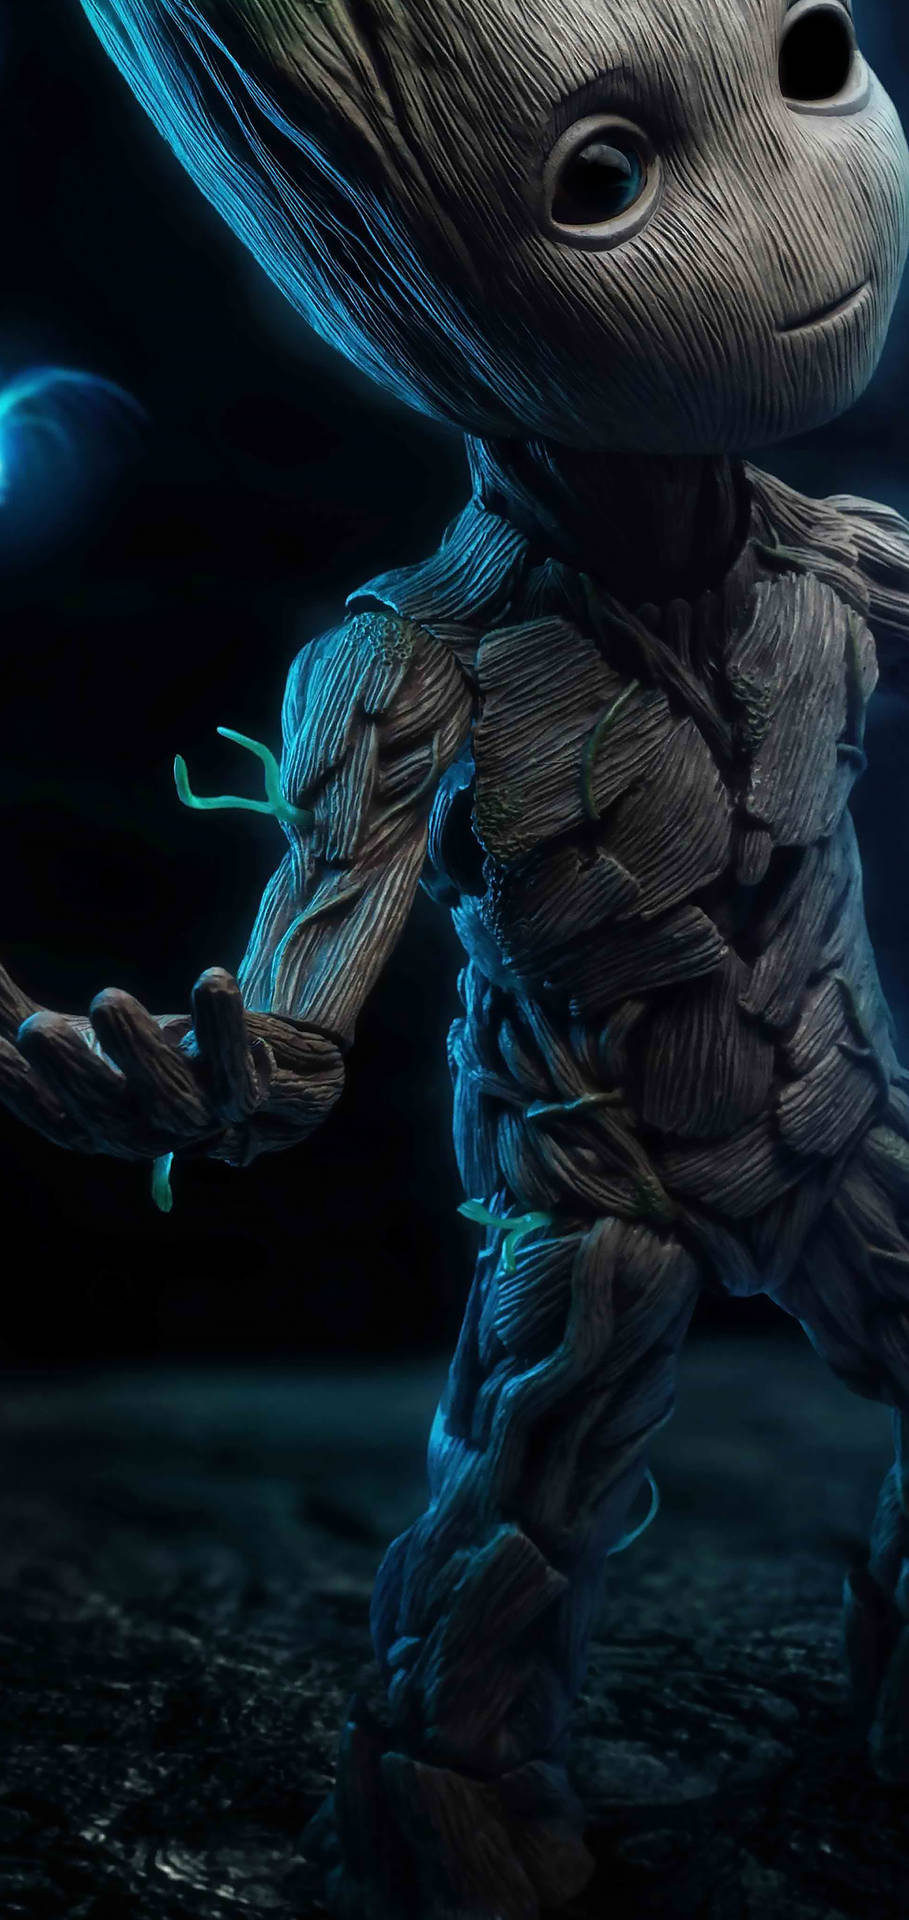 Keep Groot Close With the Samsung S10! Wallpaper